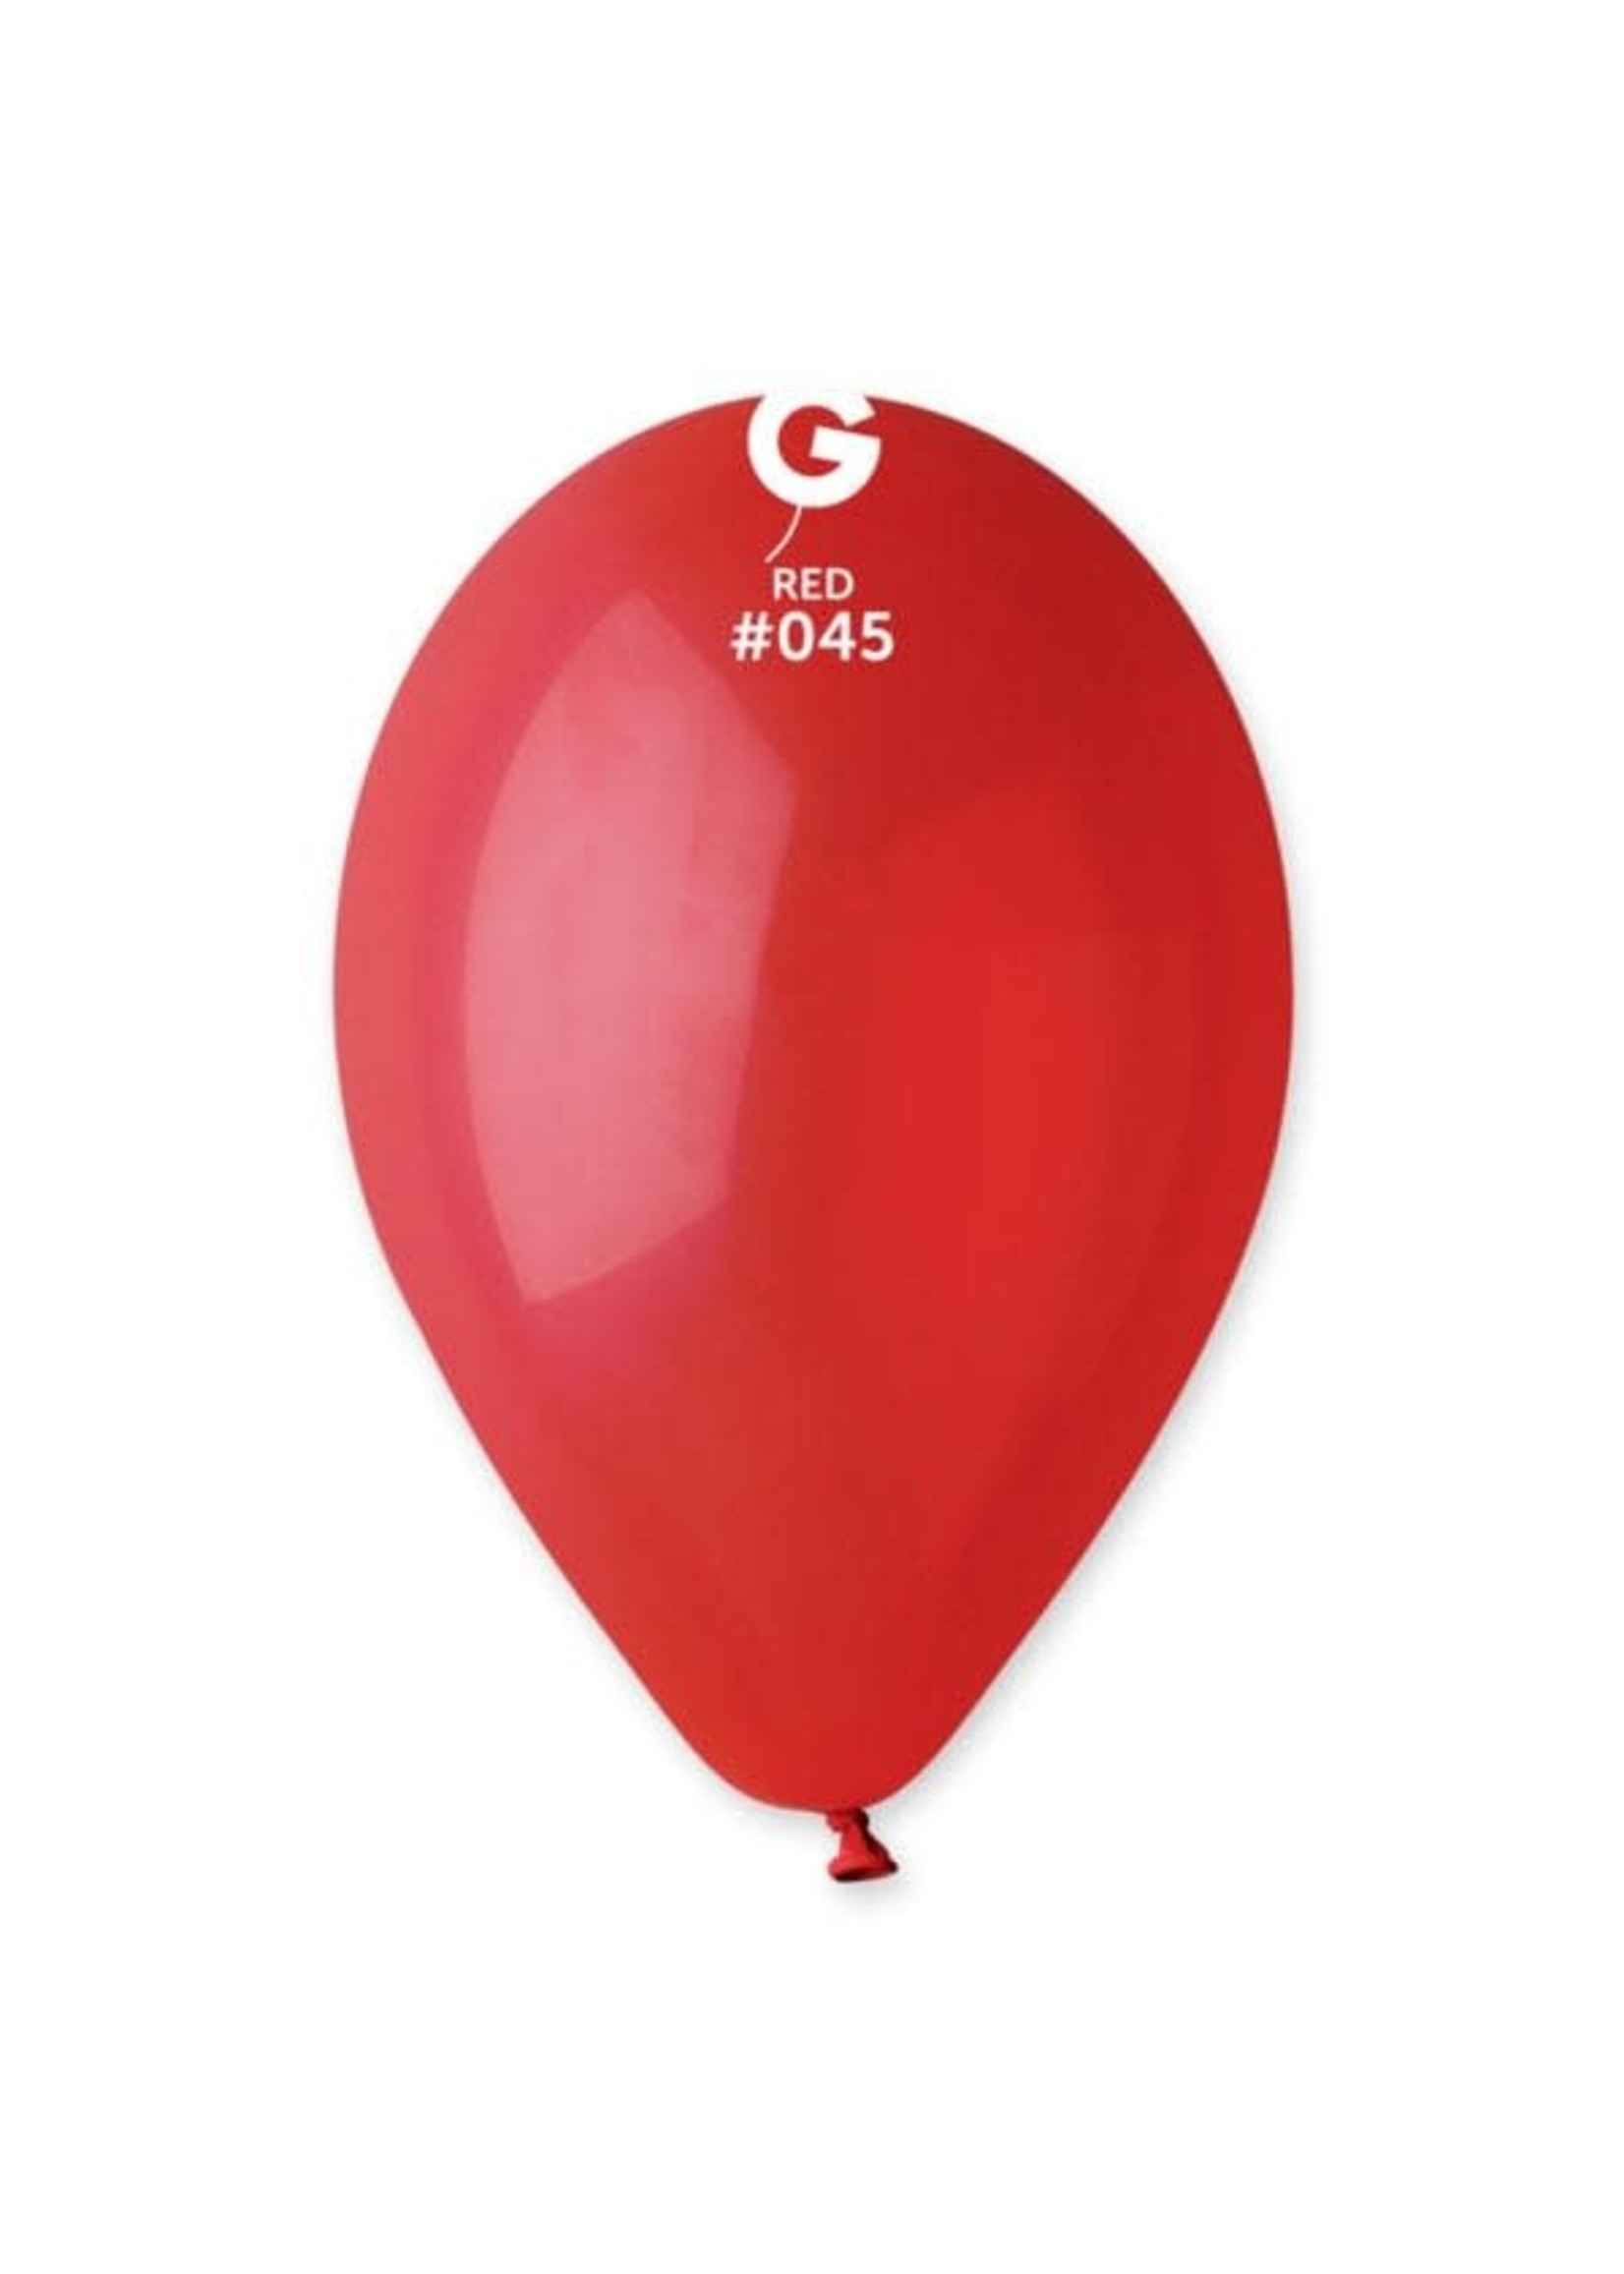 GEMAR Red #045 Latex Balloons, 12in, 50ct